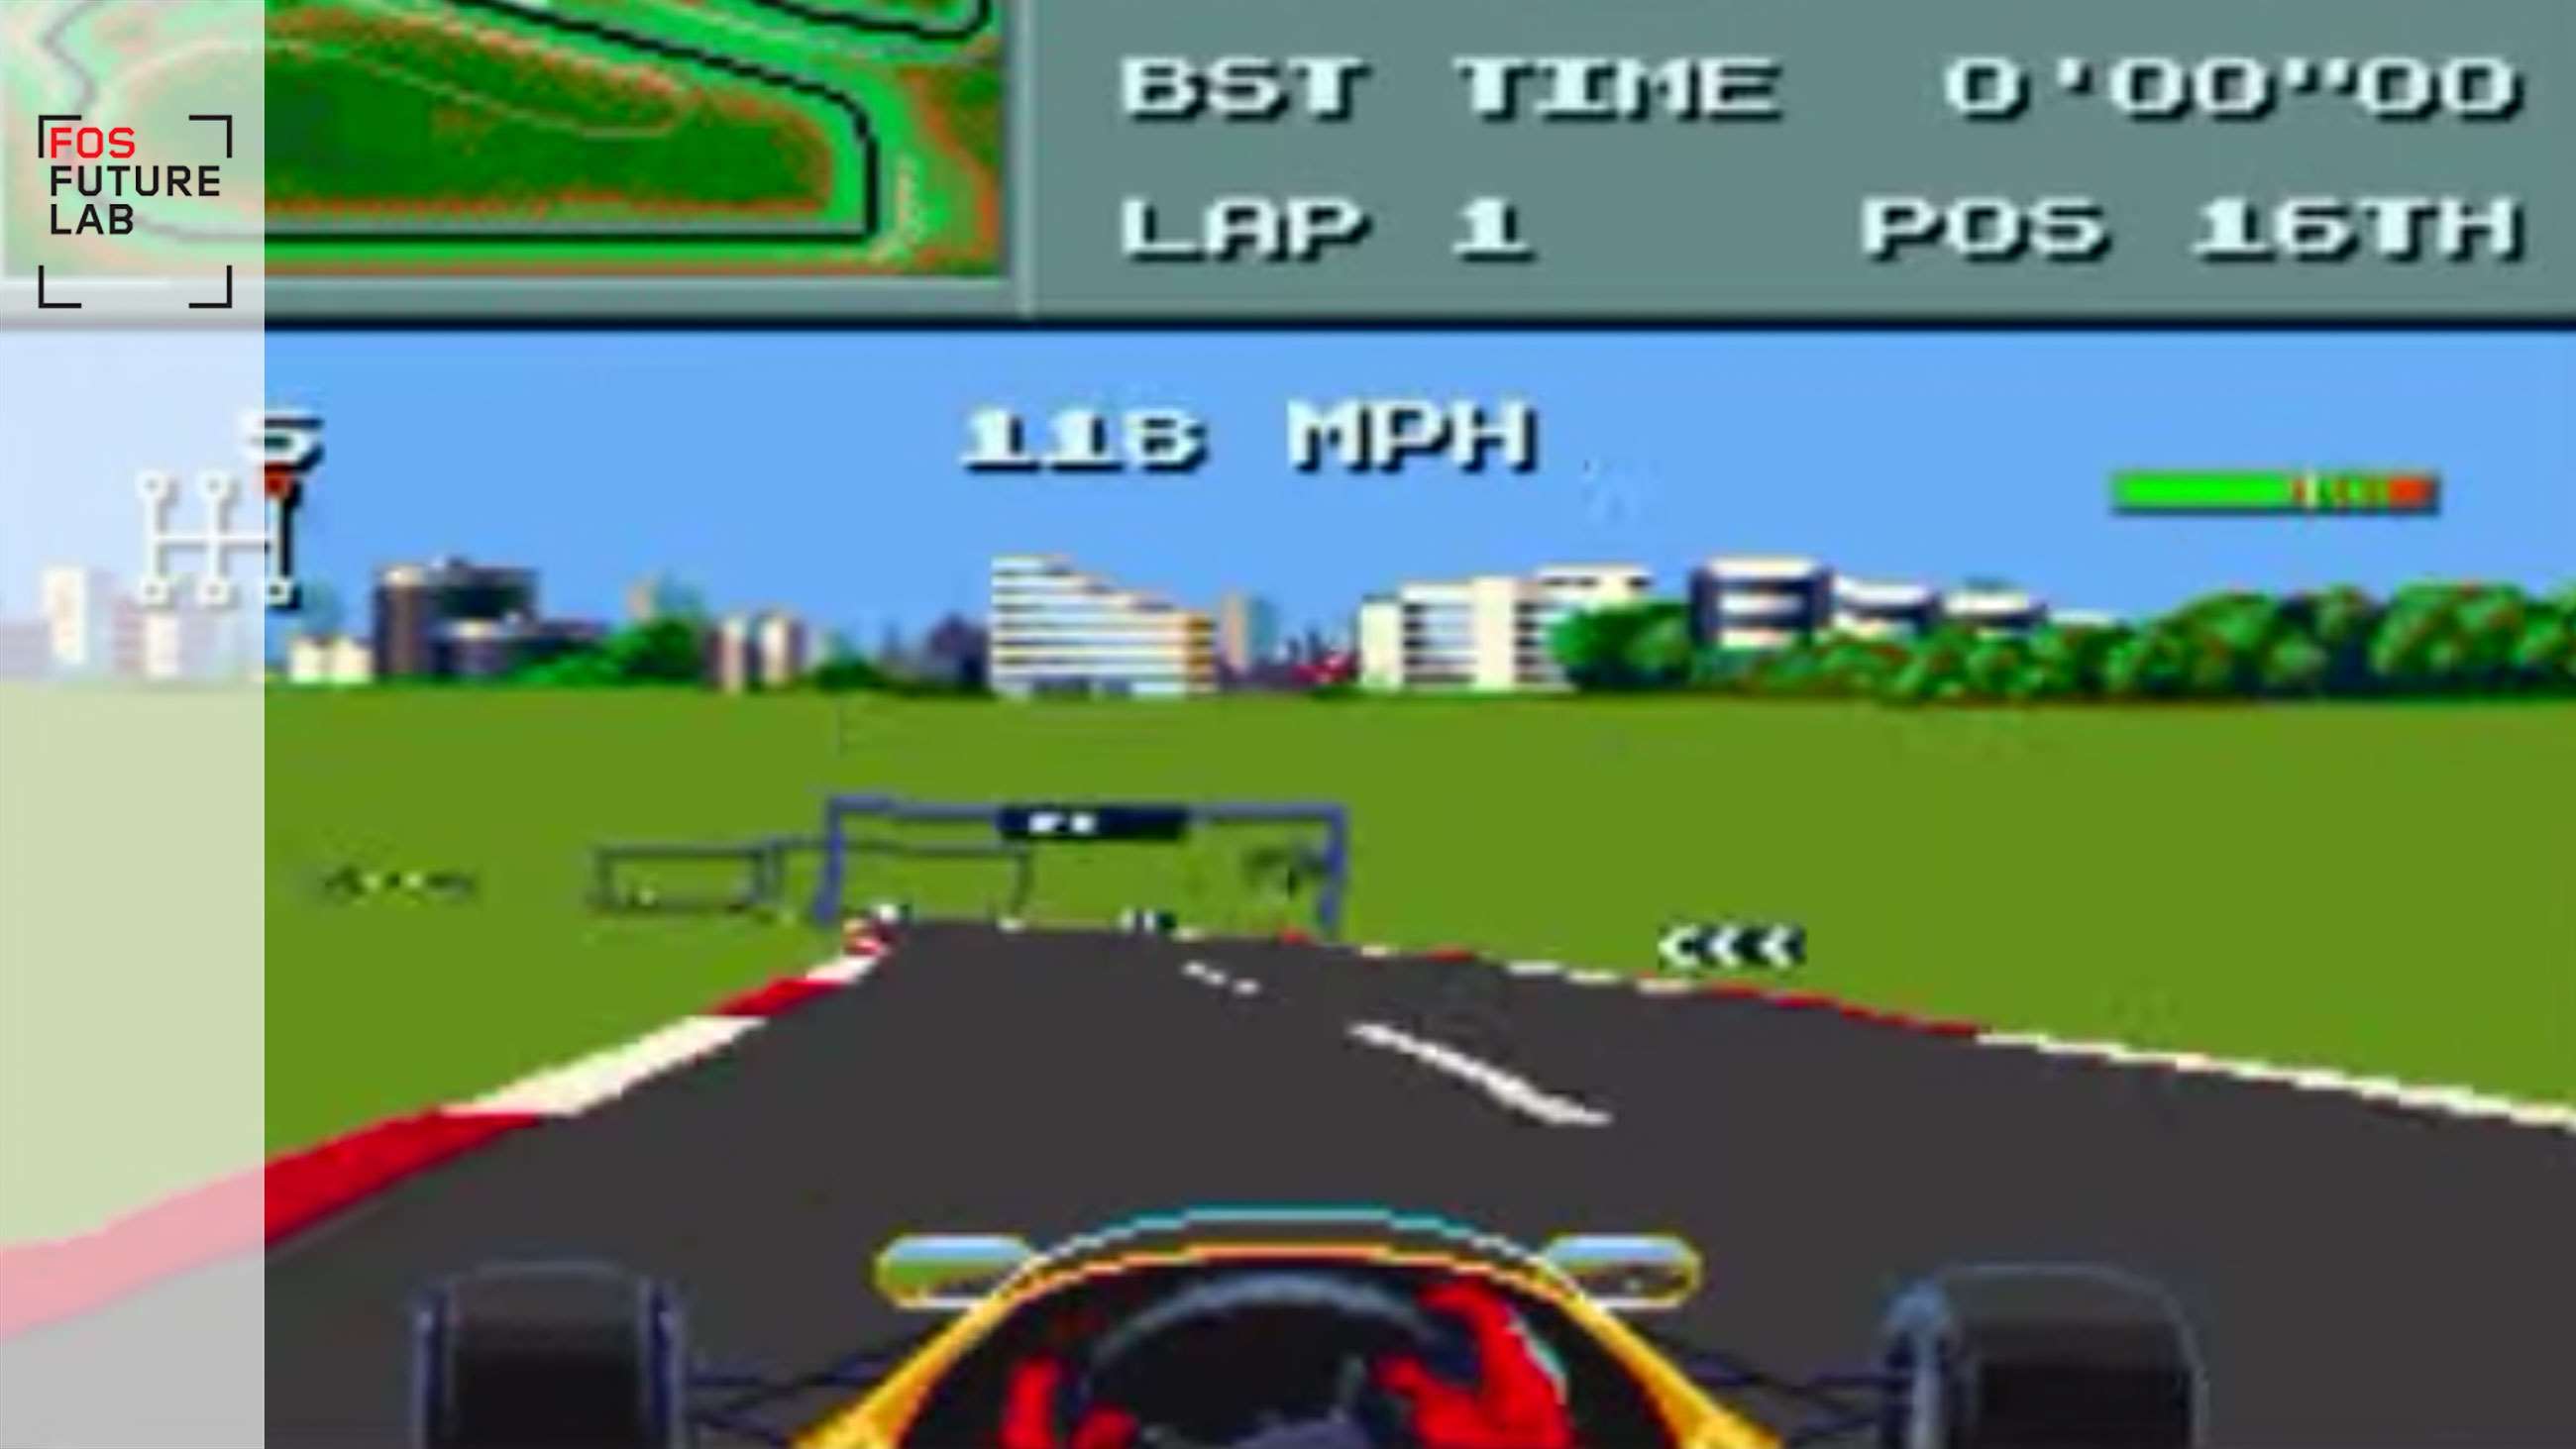 90s video game with cars